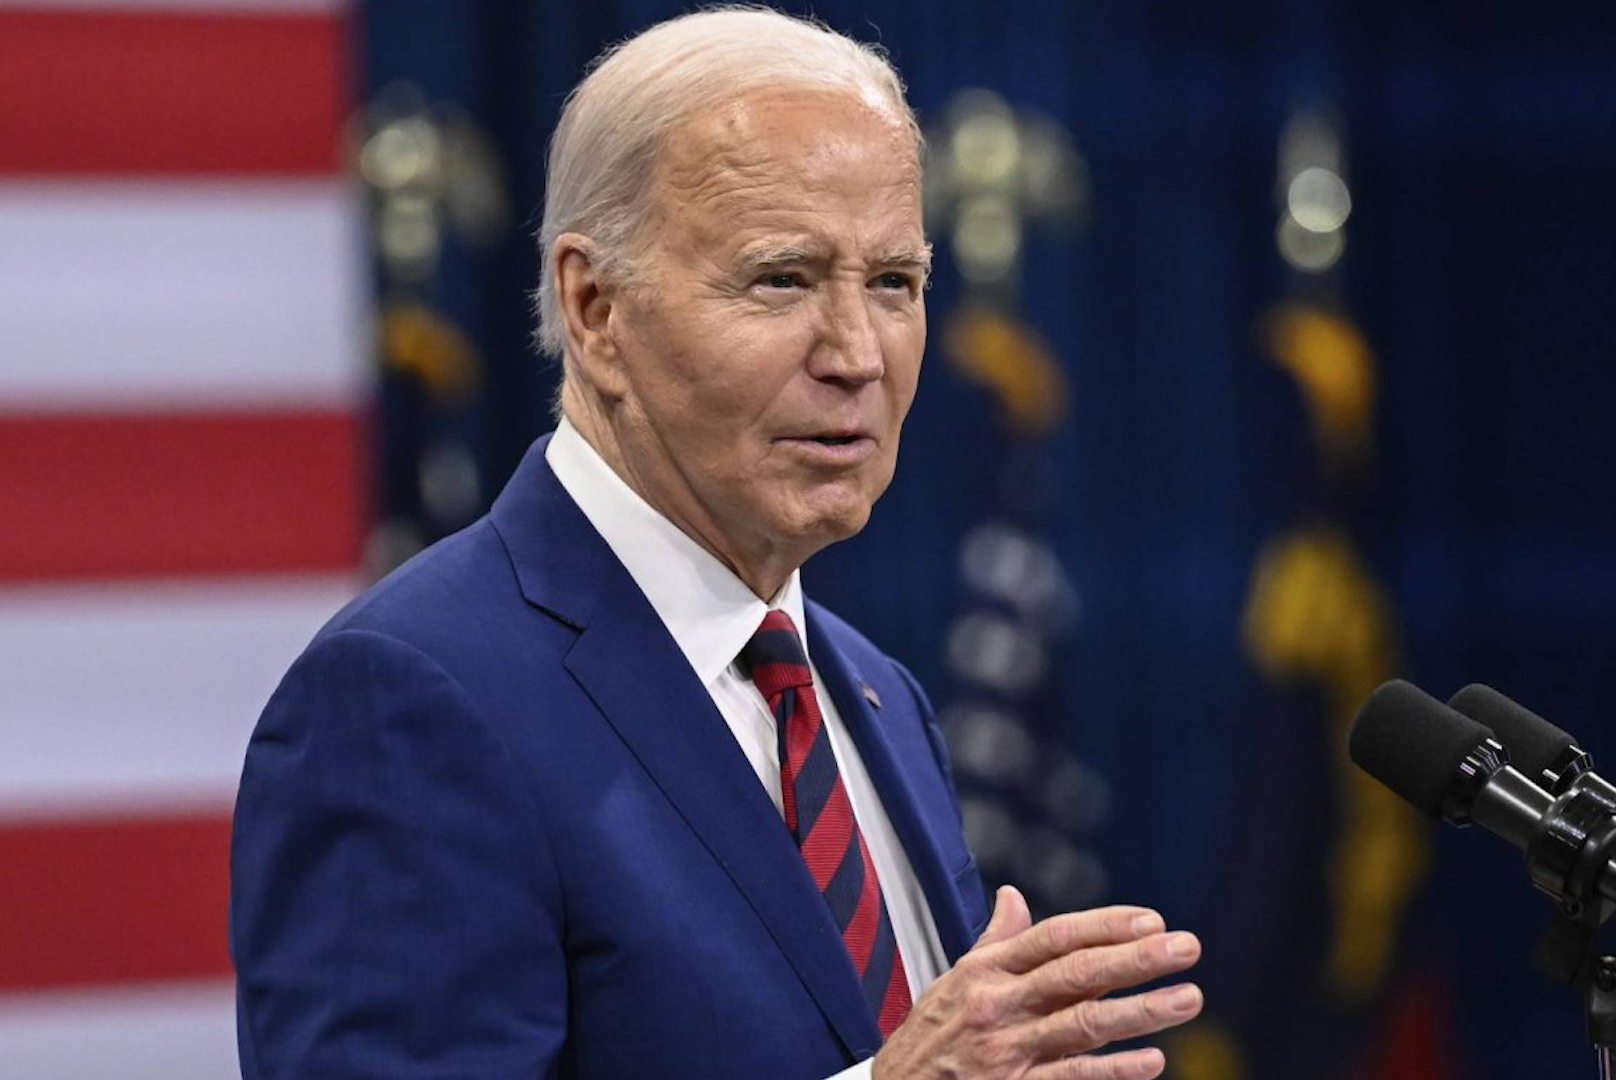 Biden, when asked if he threatened to halt military aid from Israel, responded that he asked them 'to do what they’re doing'